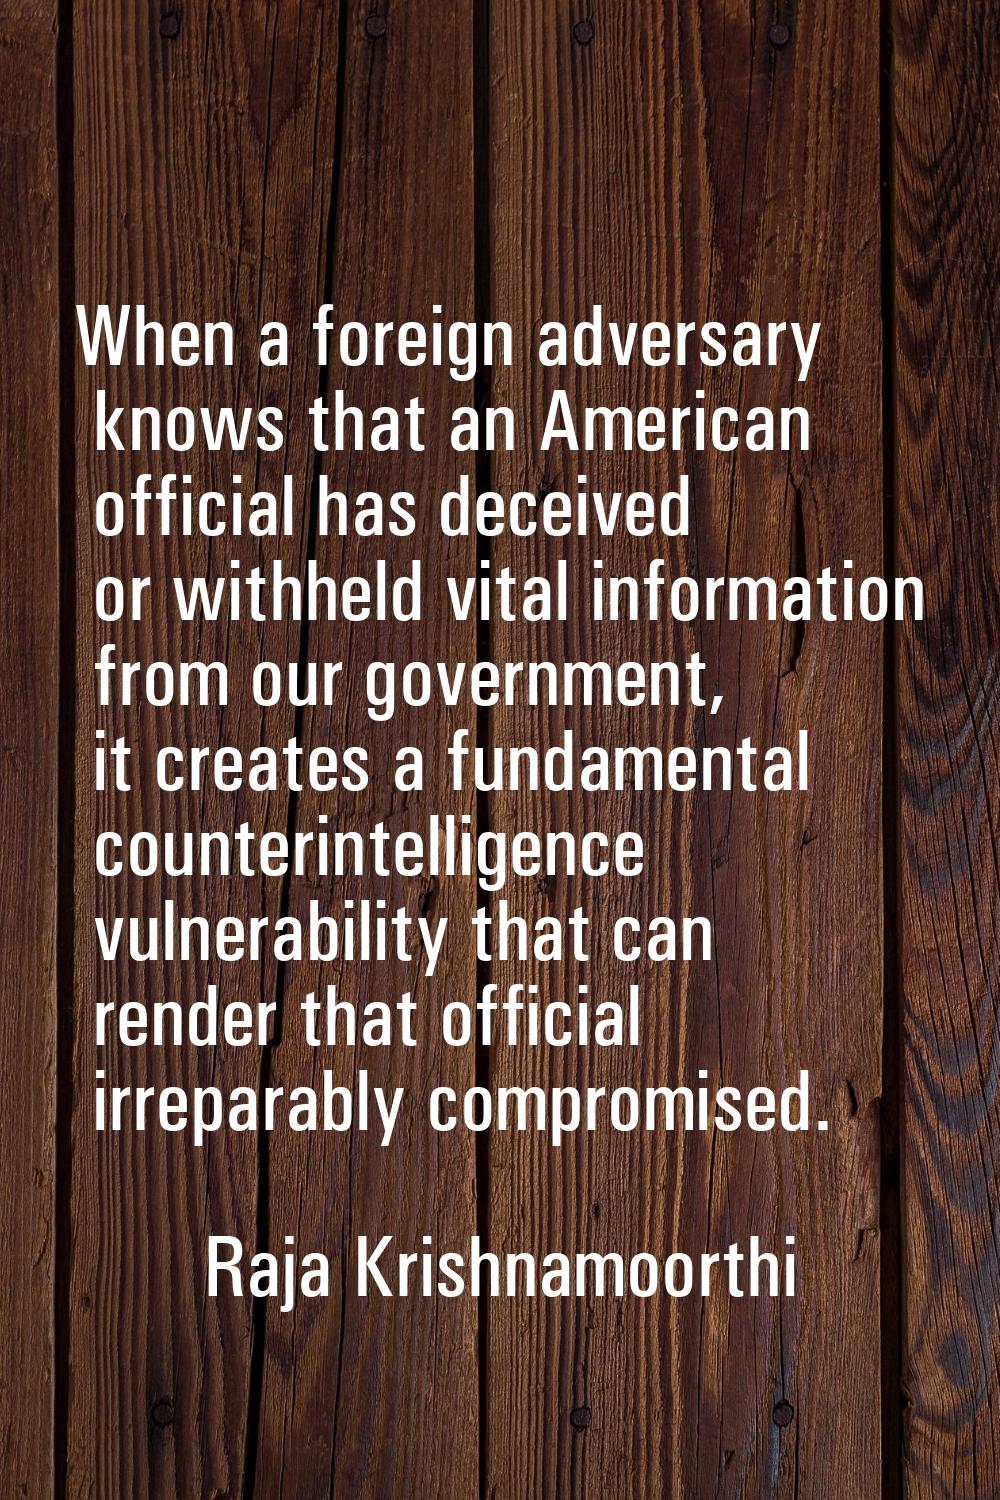 When a foreign adversary knows that an American official has deceived or withheld vital information